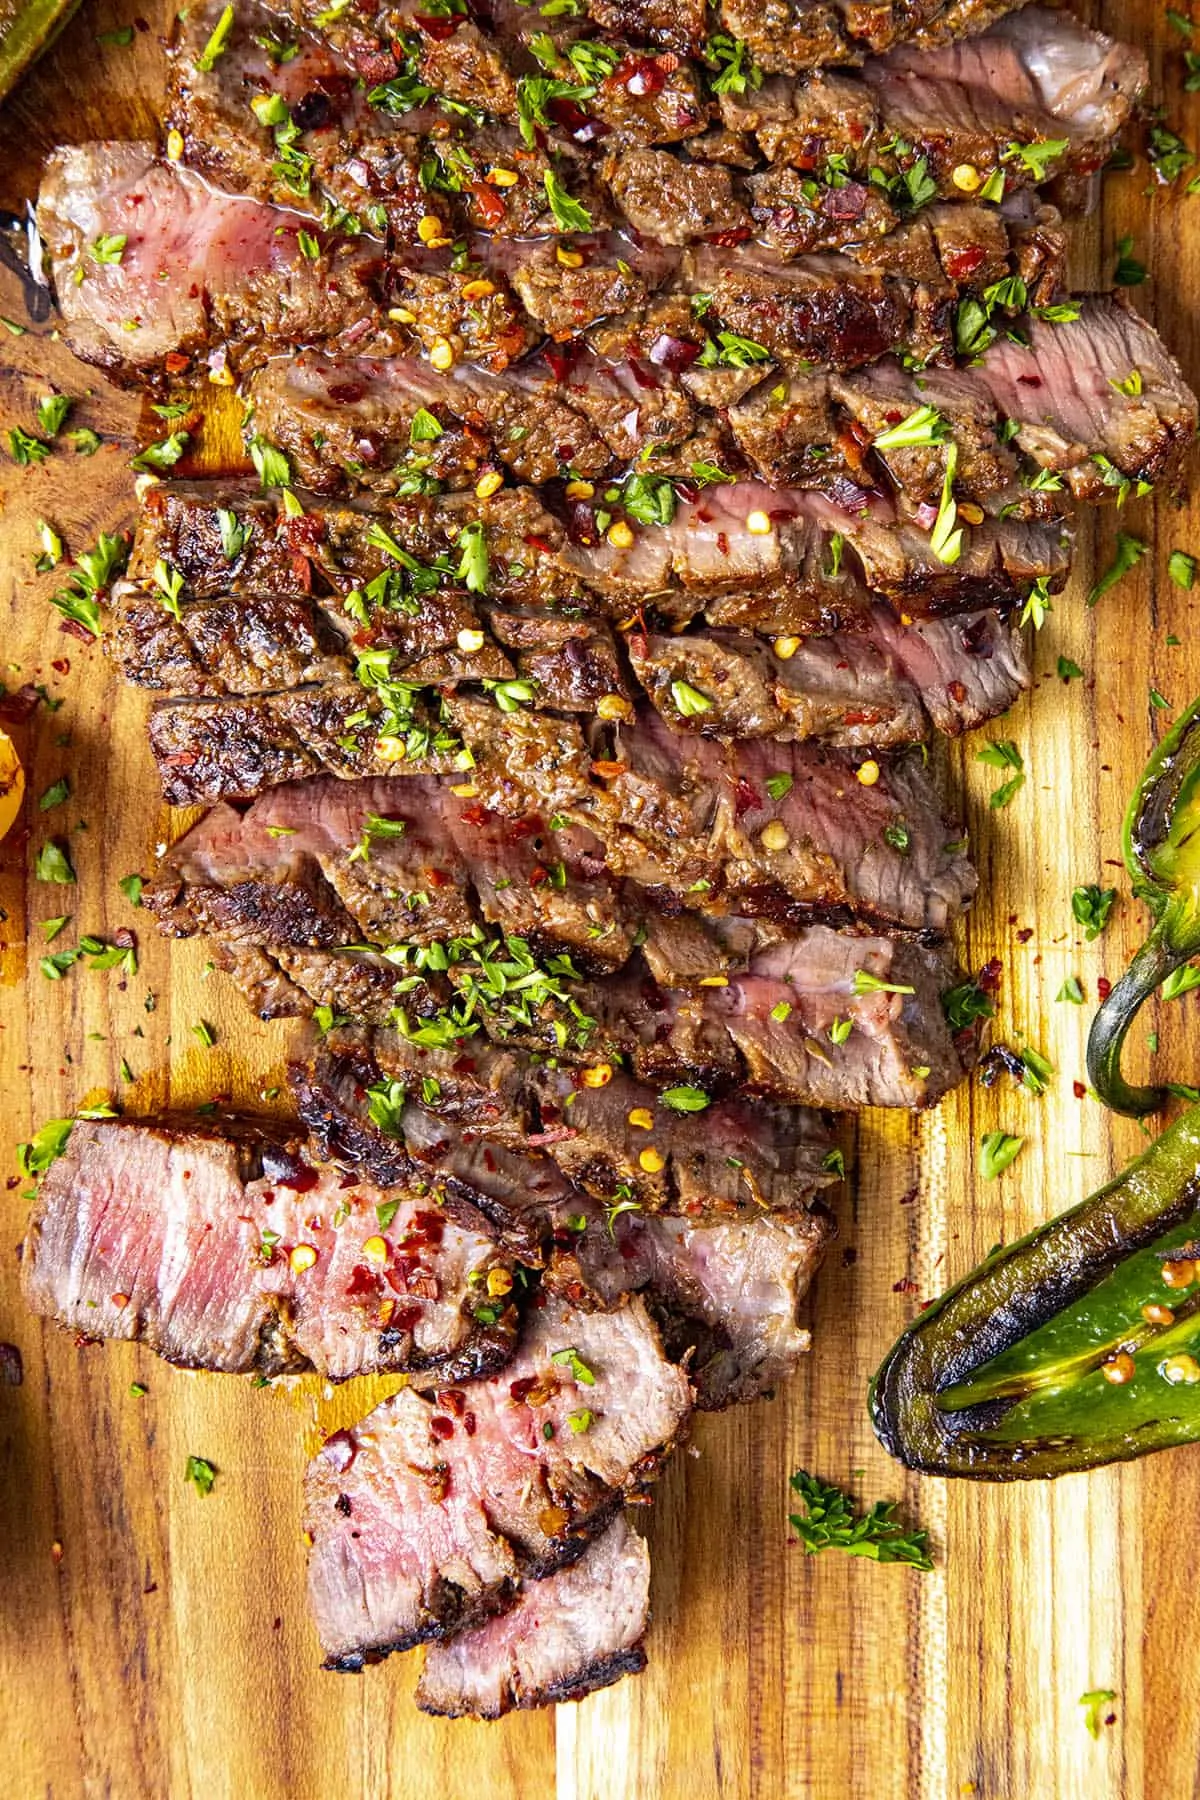 Sliced London broil on a platter with chili flakes